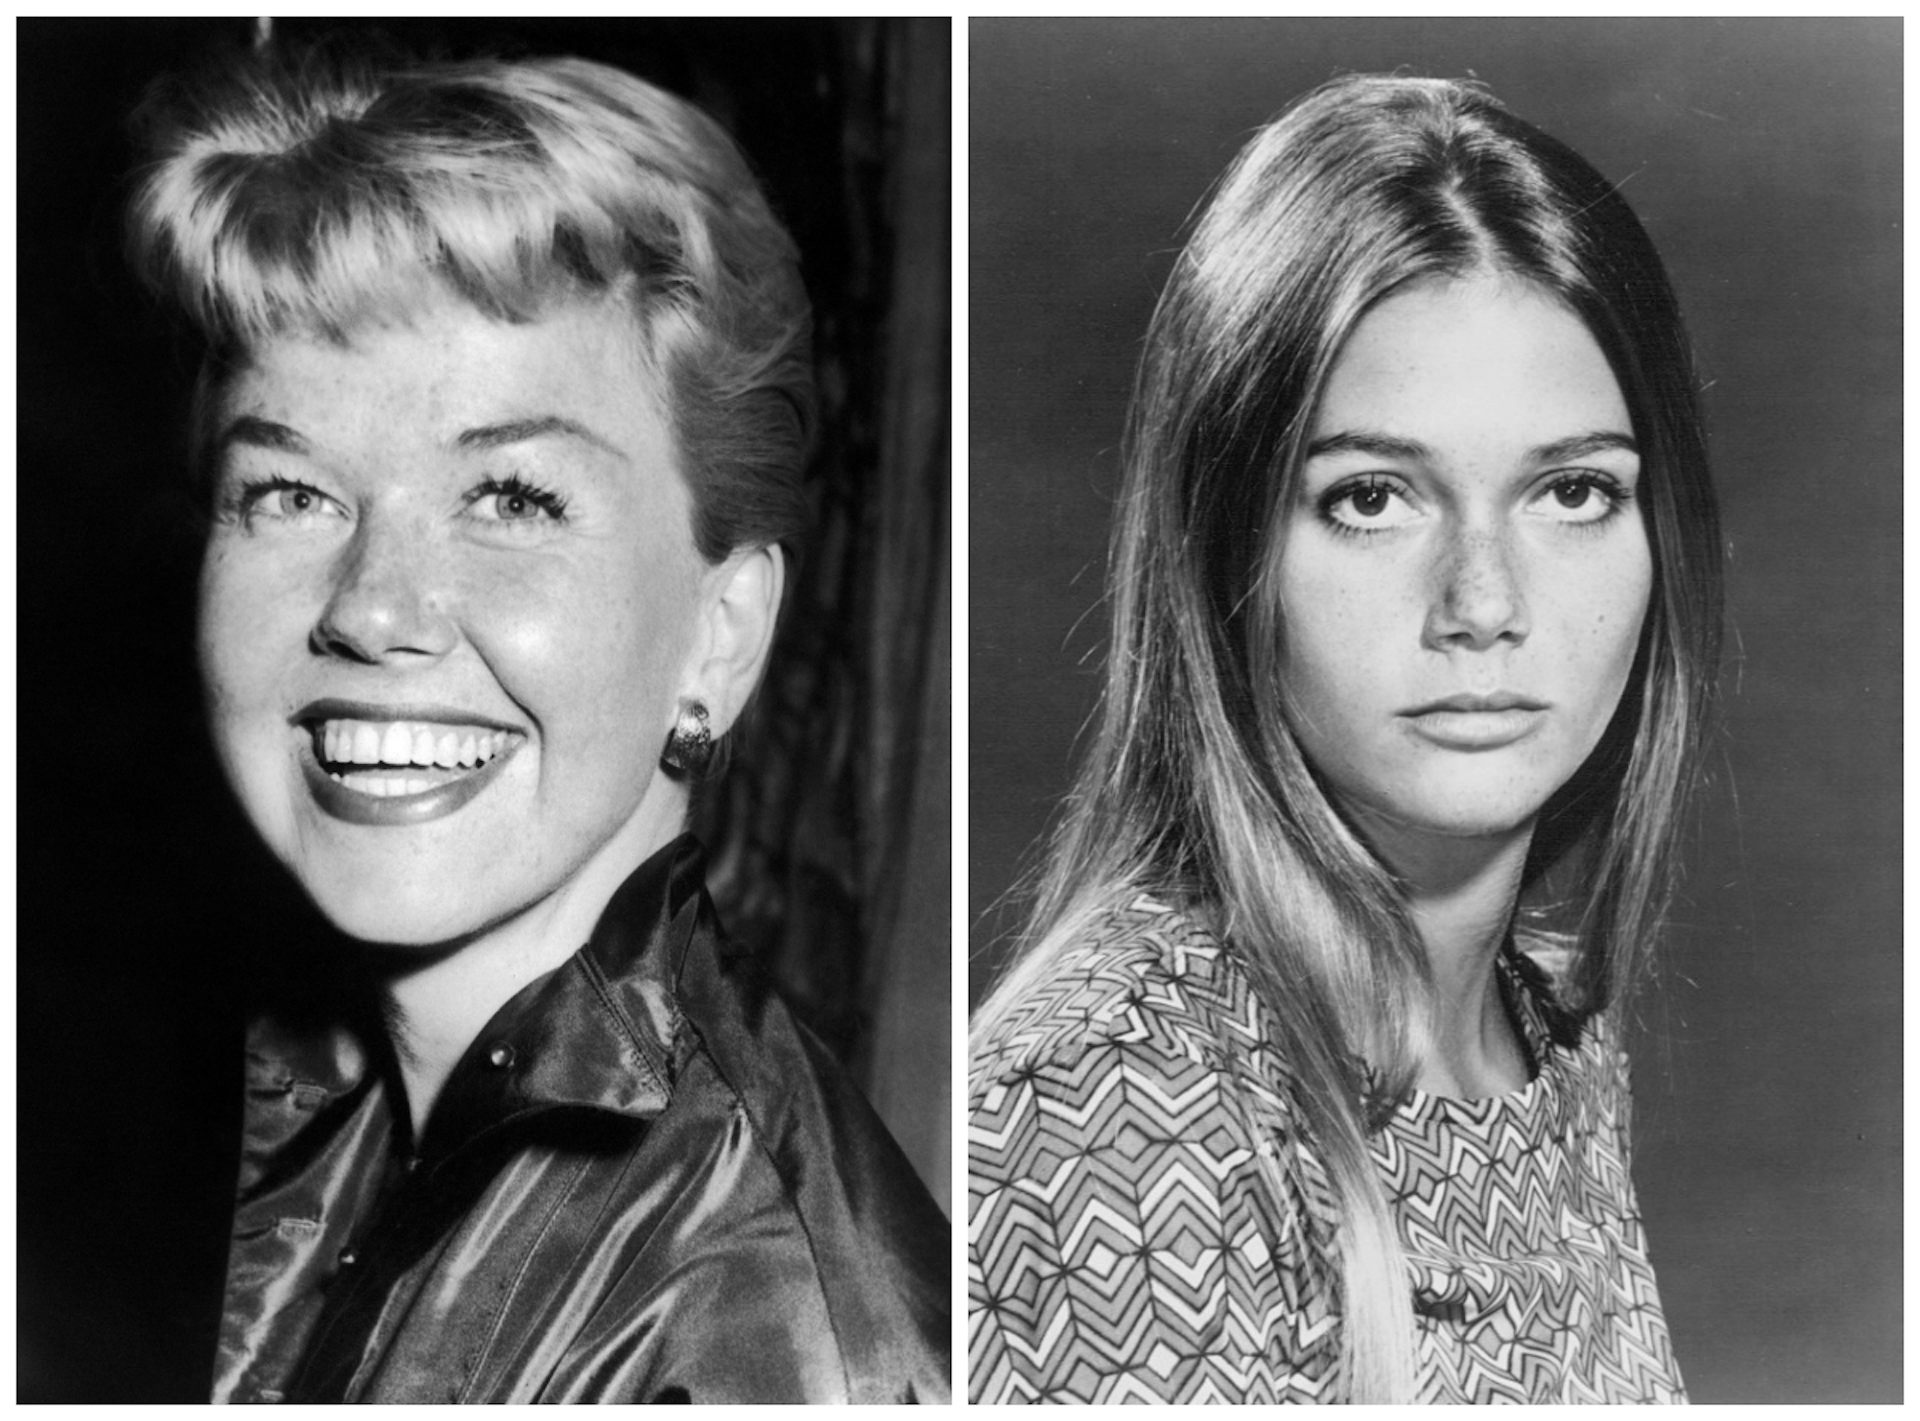 Remembering Doris Day and Peggy Lipton Icons of white femininity pic